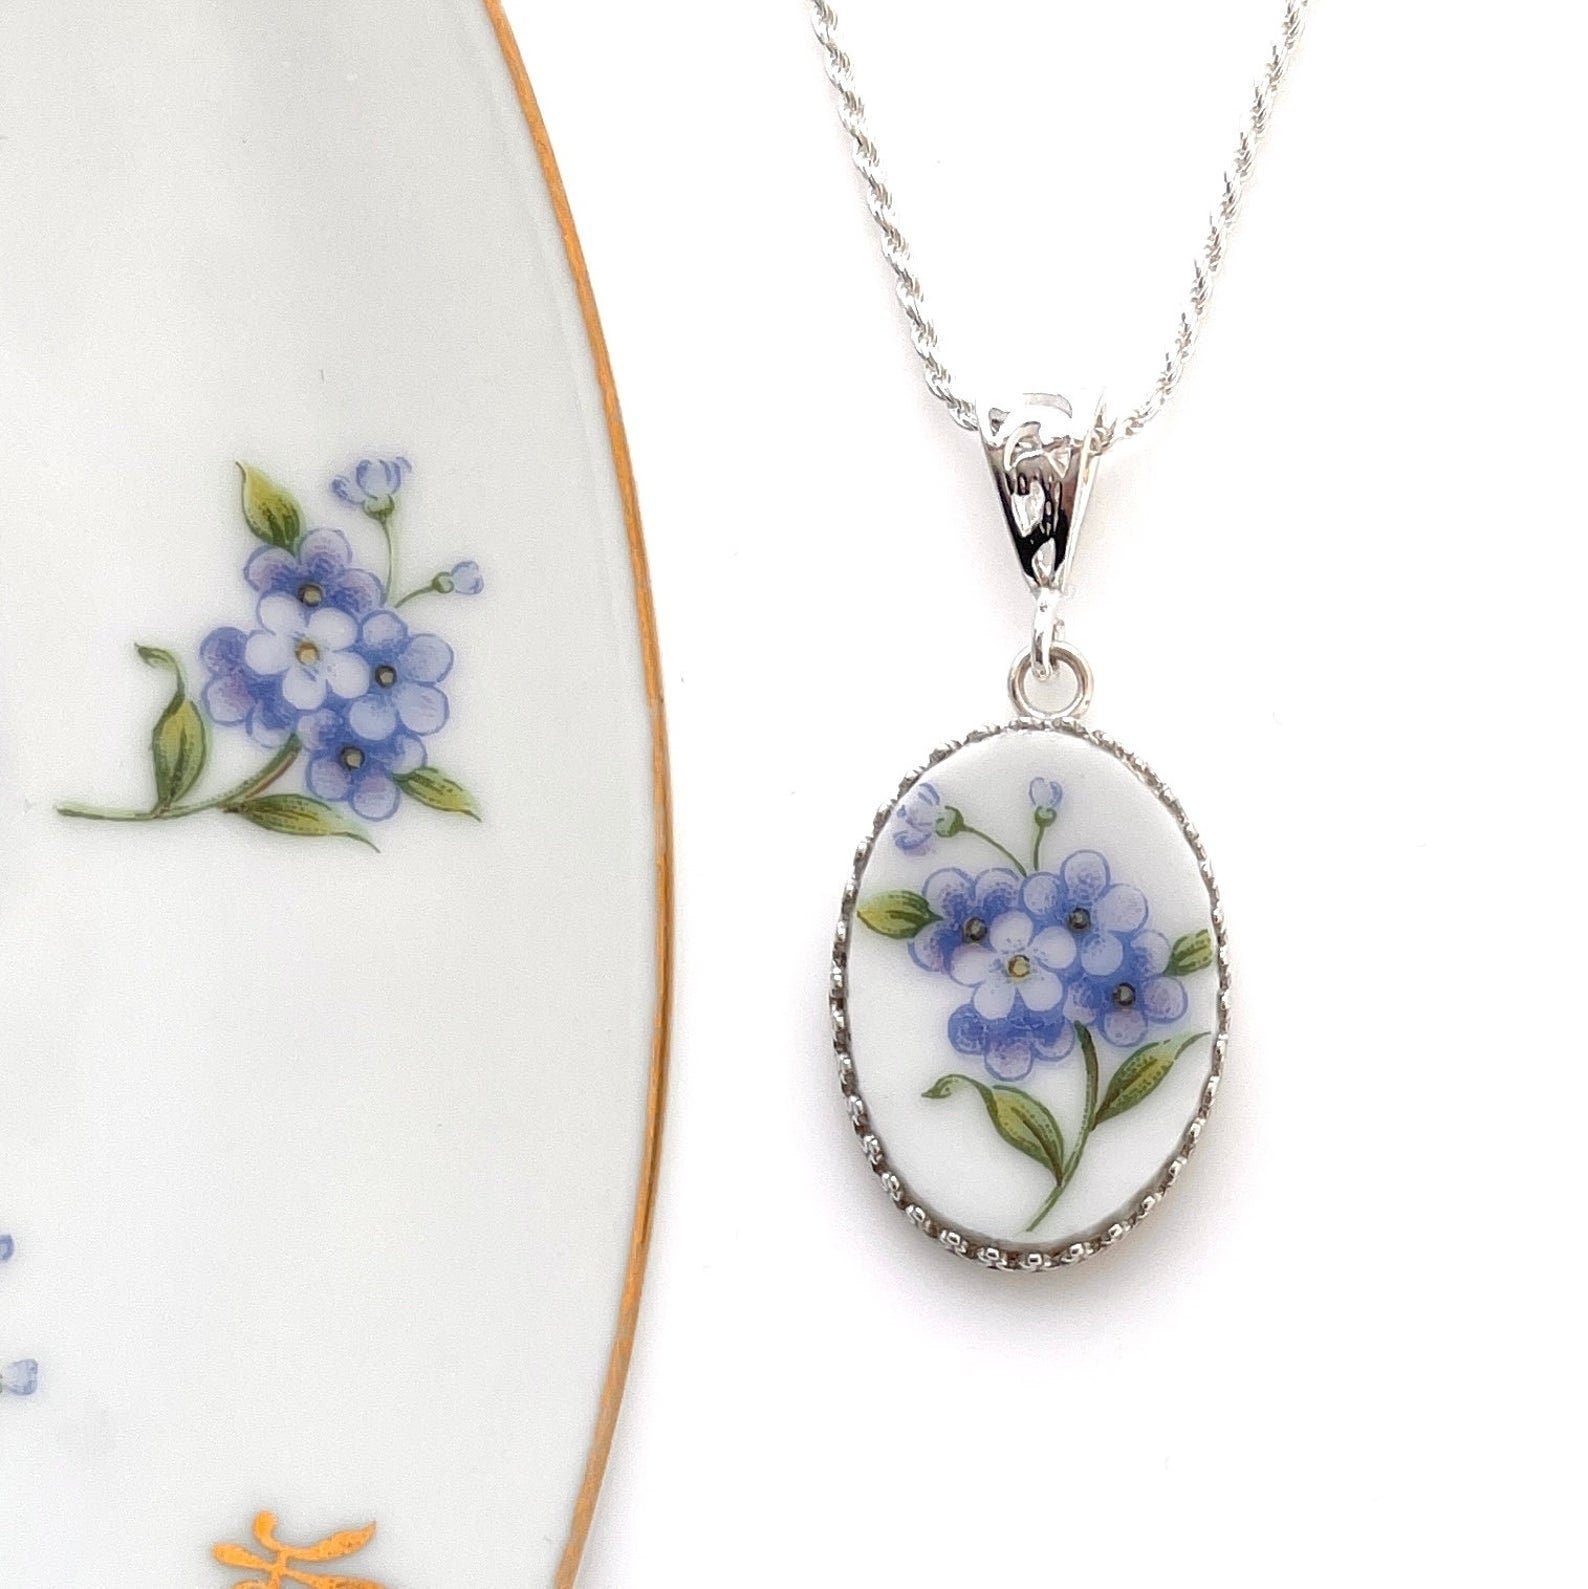 Broken China Jewelry, Forget Me Not Flower Necklace, Vintage China Necklace, 20th Anniversary Gift for Wife, Repurposed Jewelry